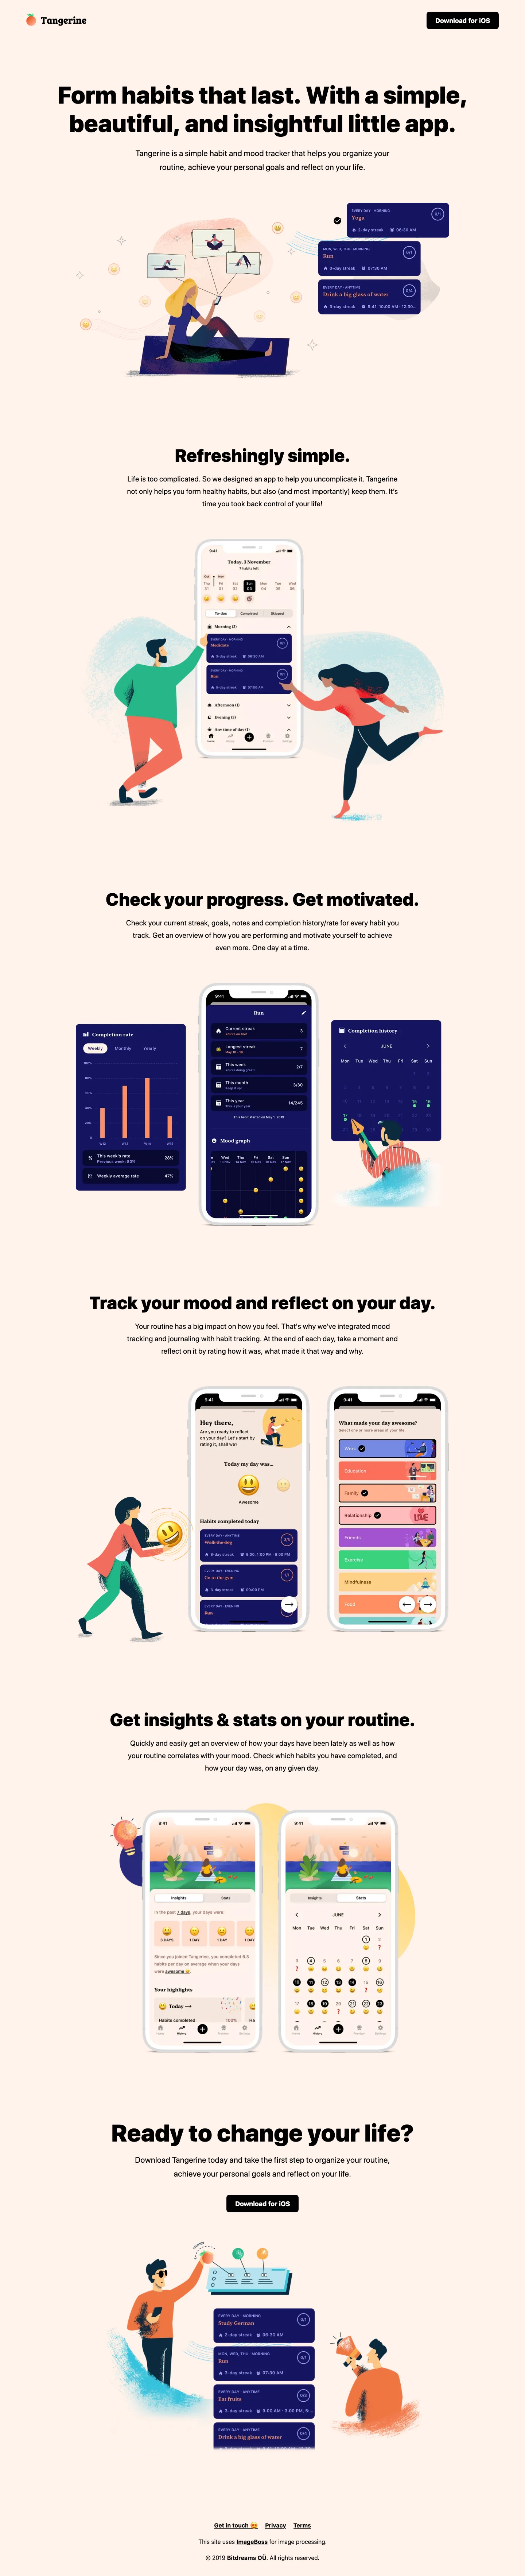 Tangerine Landing Page Example: Tangerine is a simple habit and mood tracker that helps you organize your routine, achieve your personal goals and reflect on your life.